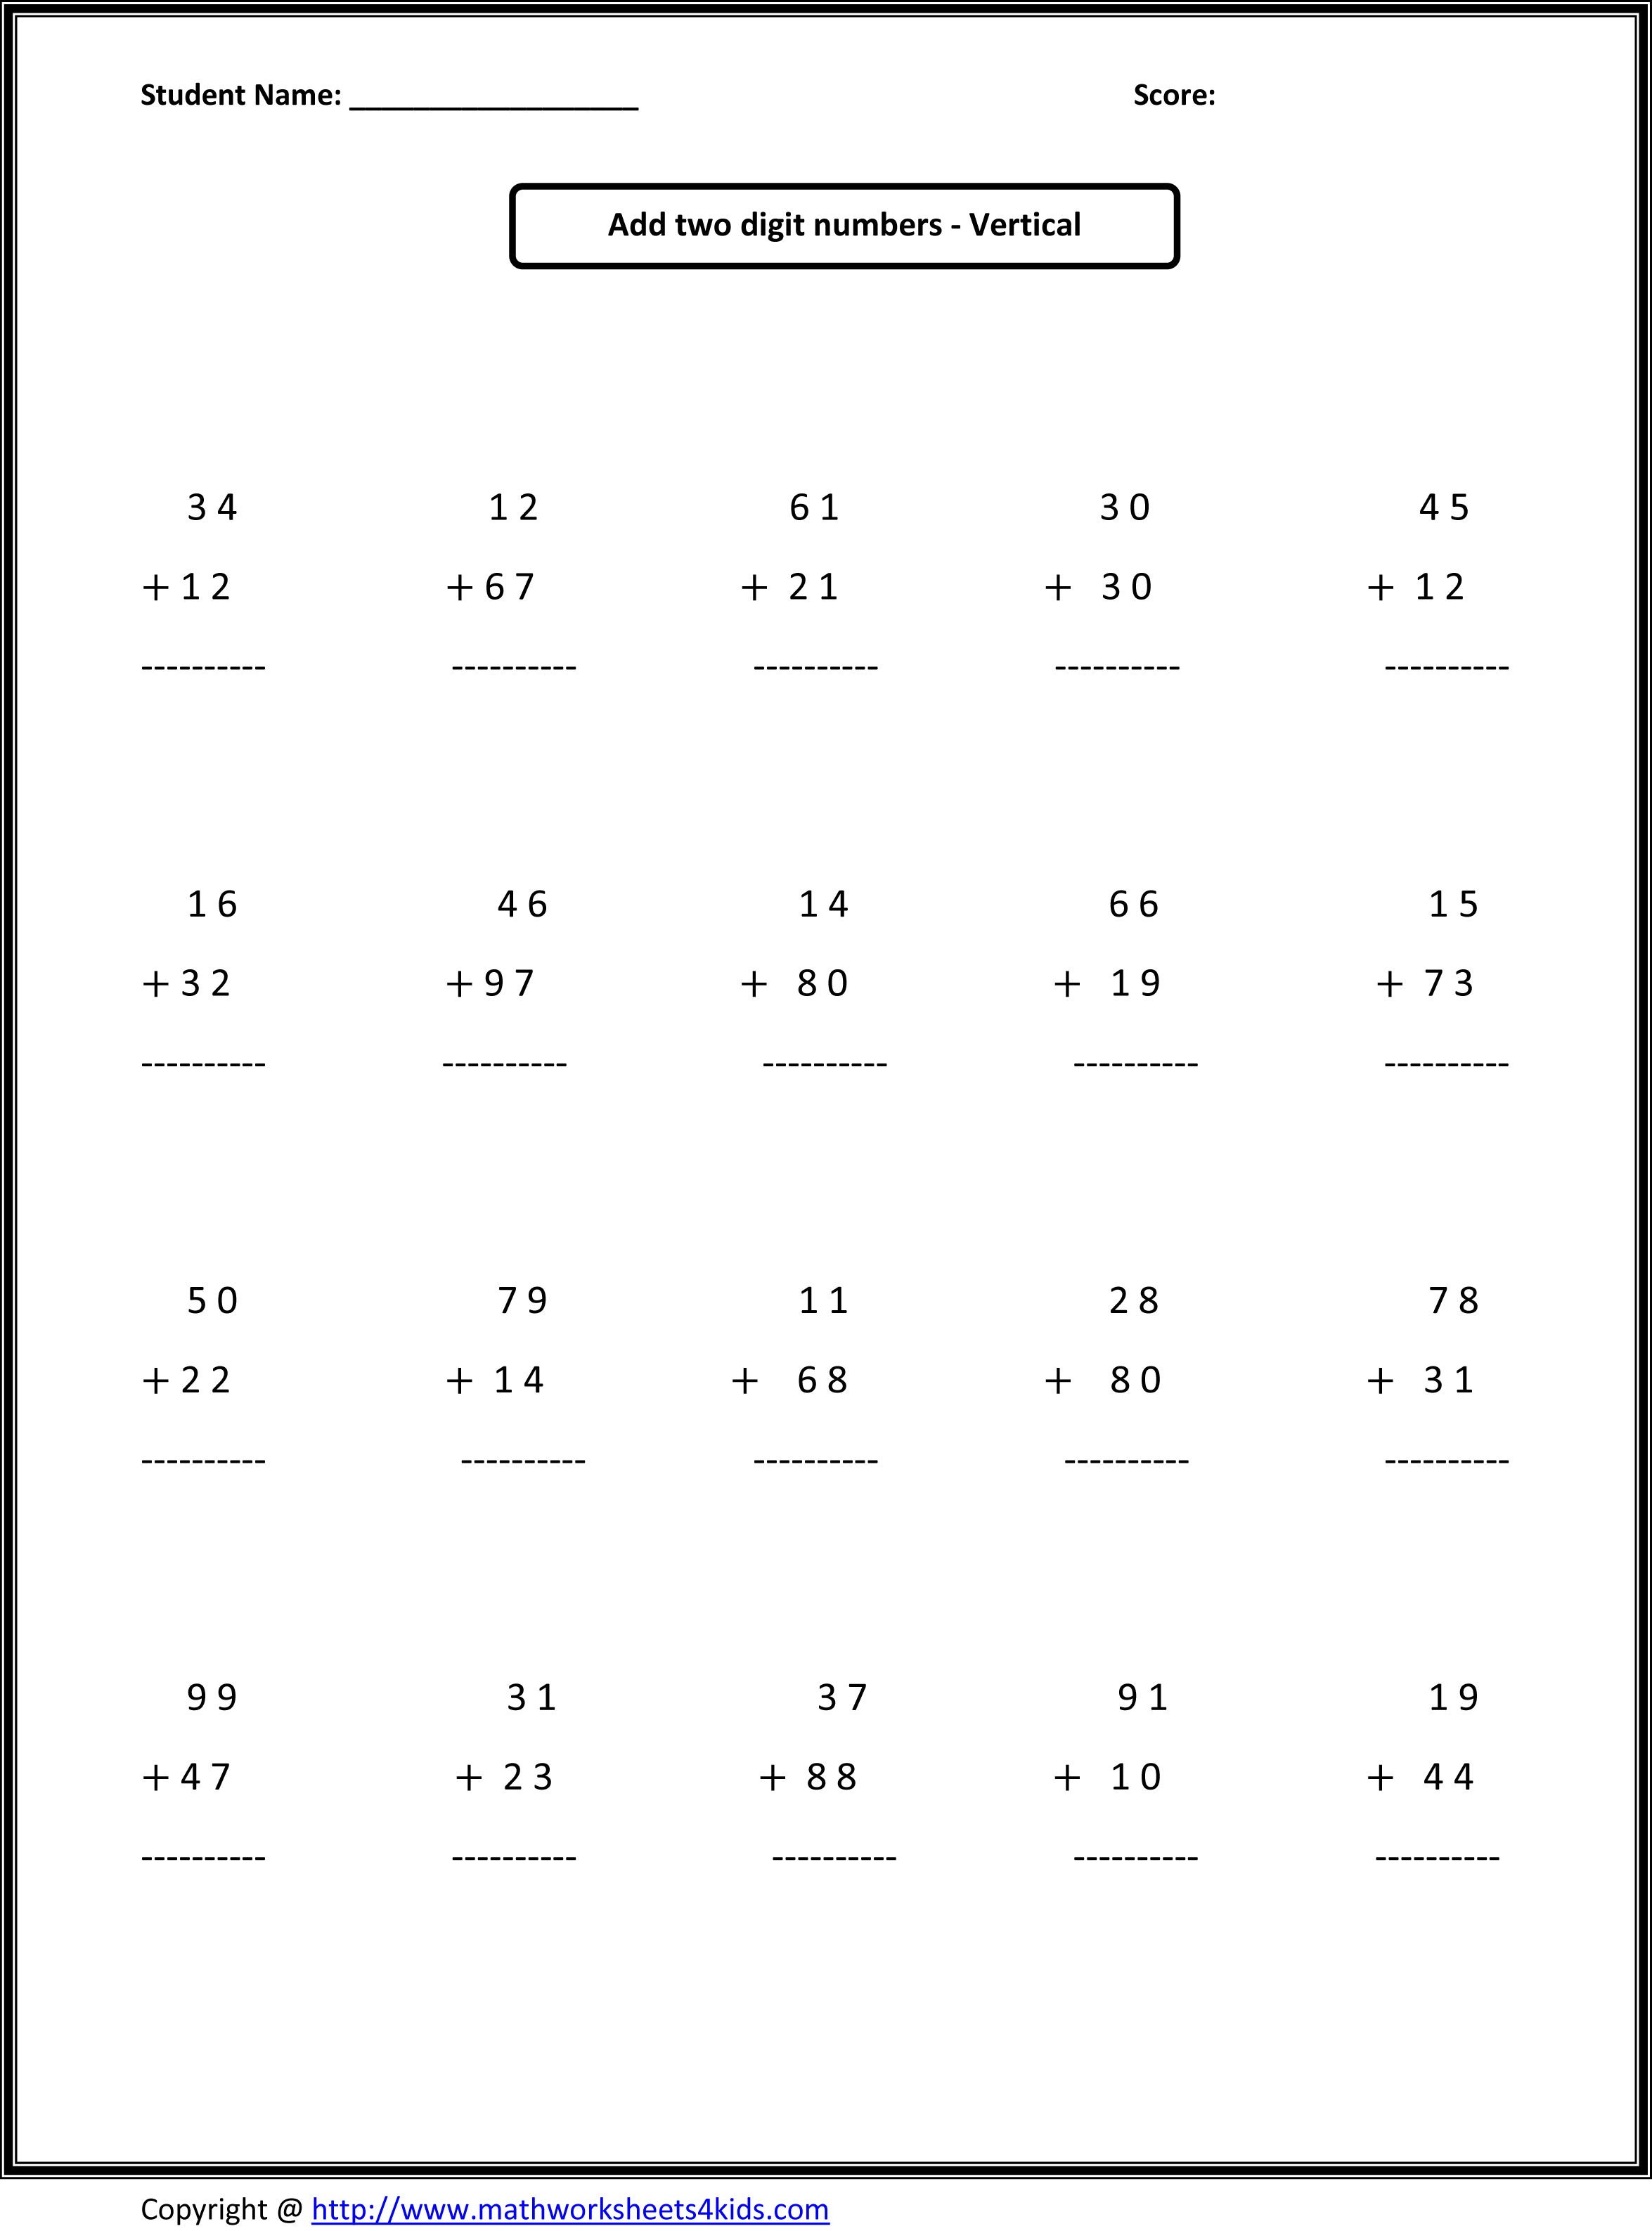 19-best-images-of-elementary-iep-worksheet-student-self-monitoring